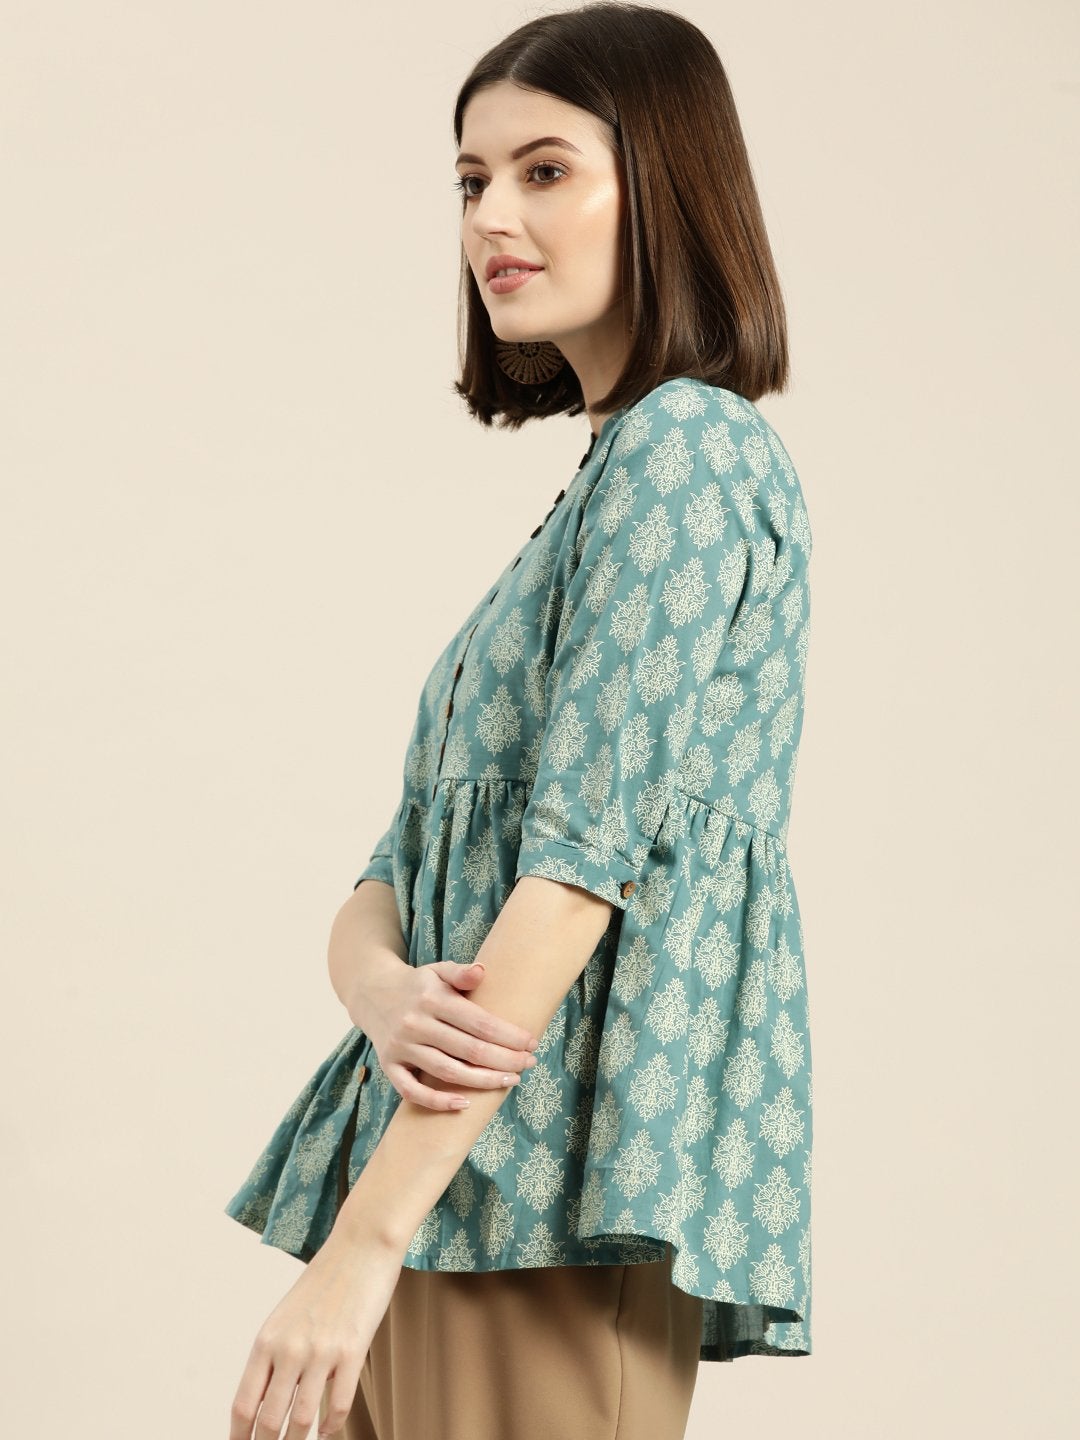 Women's Teal Printed Front Button Gathered Top - SASSAFRAS